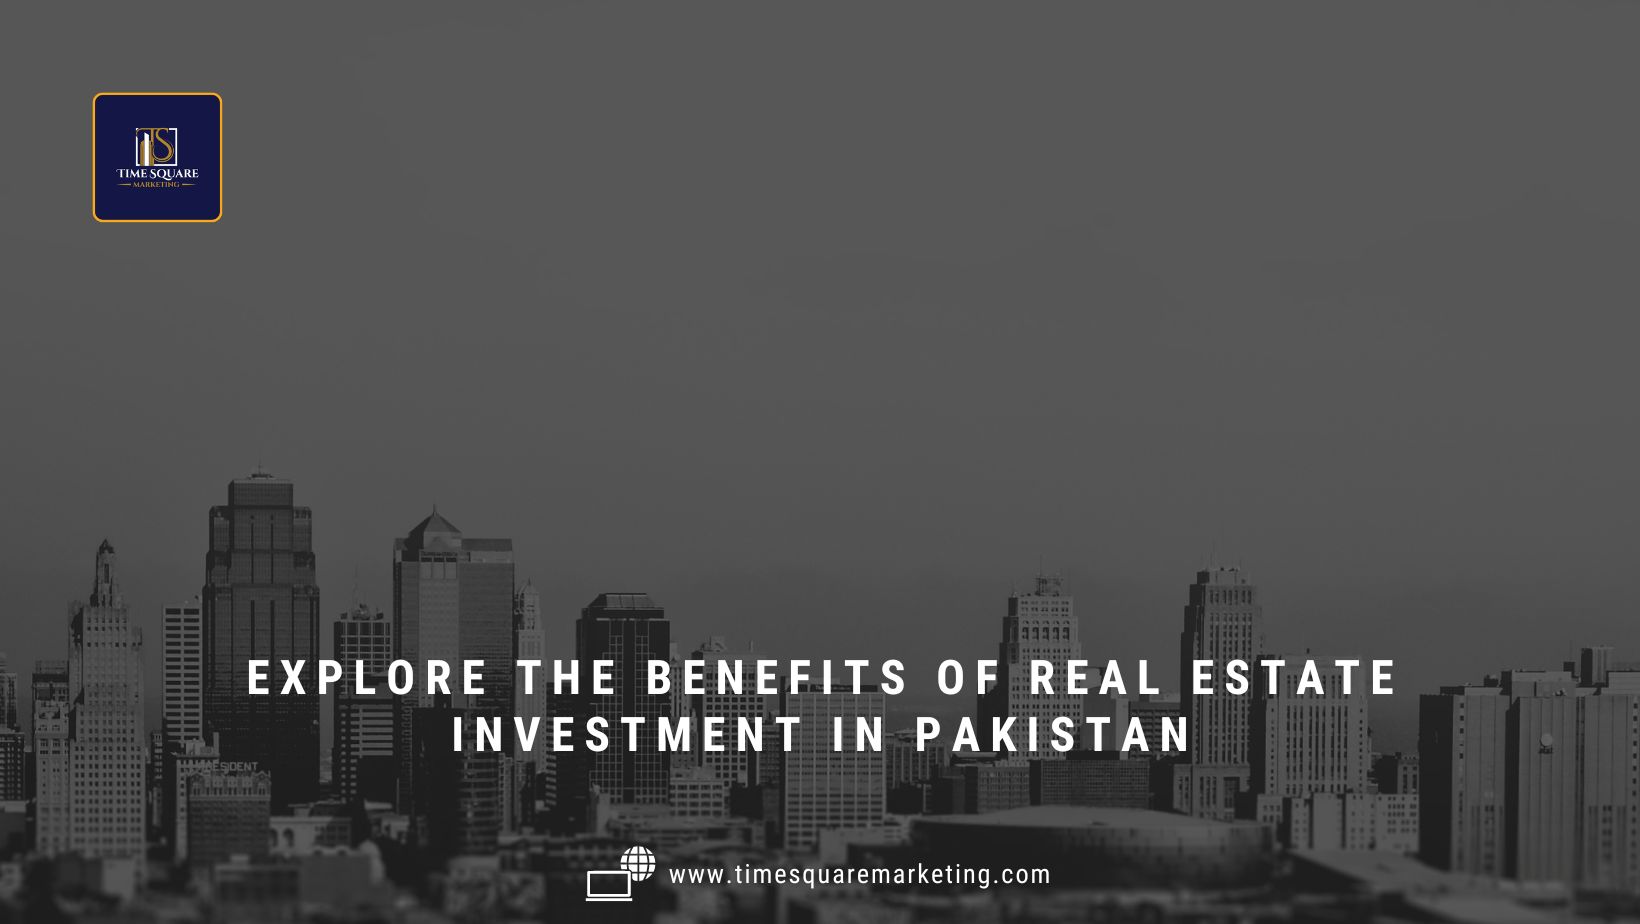 Explore the Benefits of Real Estate Investment in Pakistan